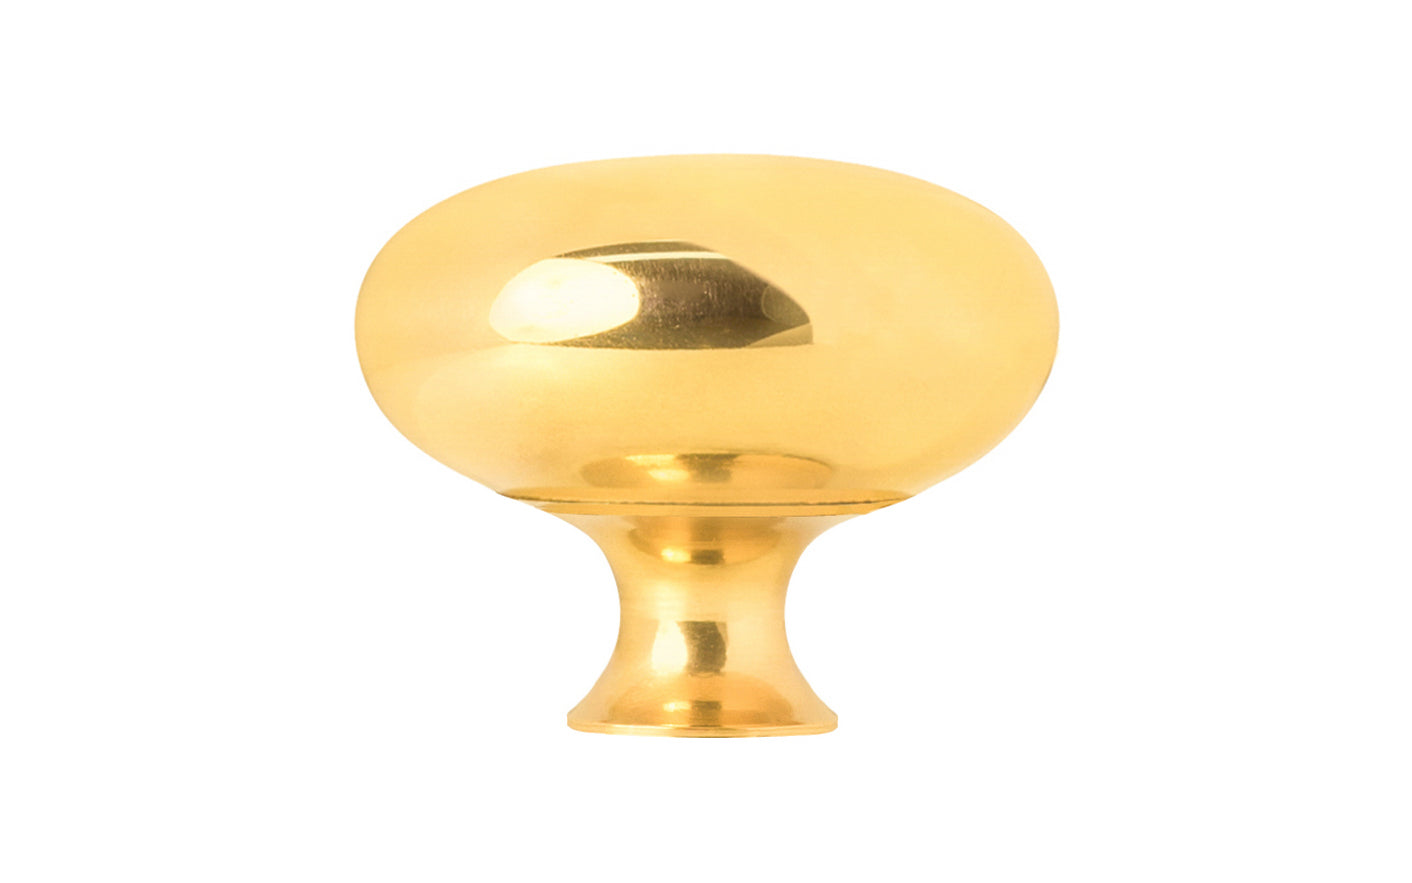 Vintage-style Hardware · Classic & traditional solid core unlacquered solid brass cabinet knob. 1-1/4" diameter knob. Made of a quality solid brass core, this stylish knob has a smooth & weighty feel & comes with an optional rosette backplate piece. Non-lacquered brass (the unlacquered brass will patina over time). Great for kitchens, bathrooms, on furniture, cabinets, drawers, small doors, cabinet doors